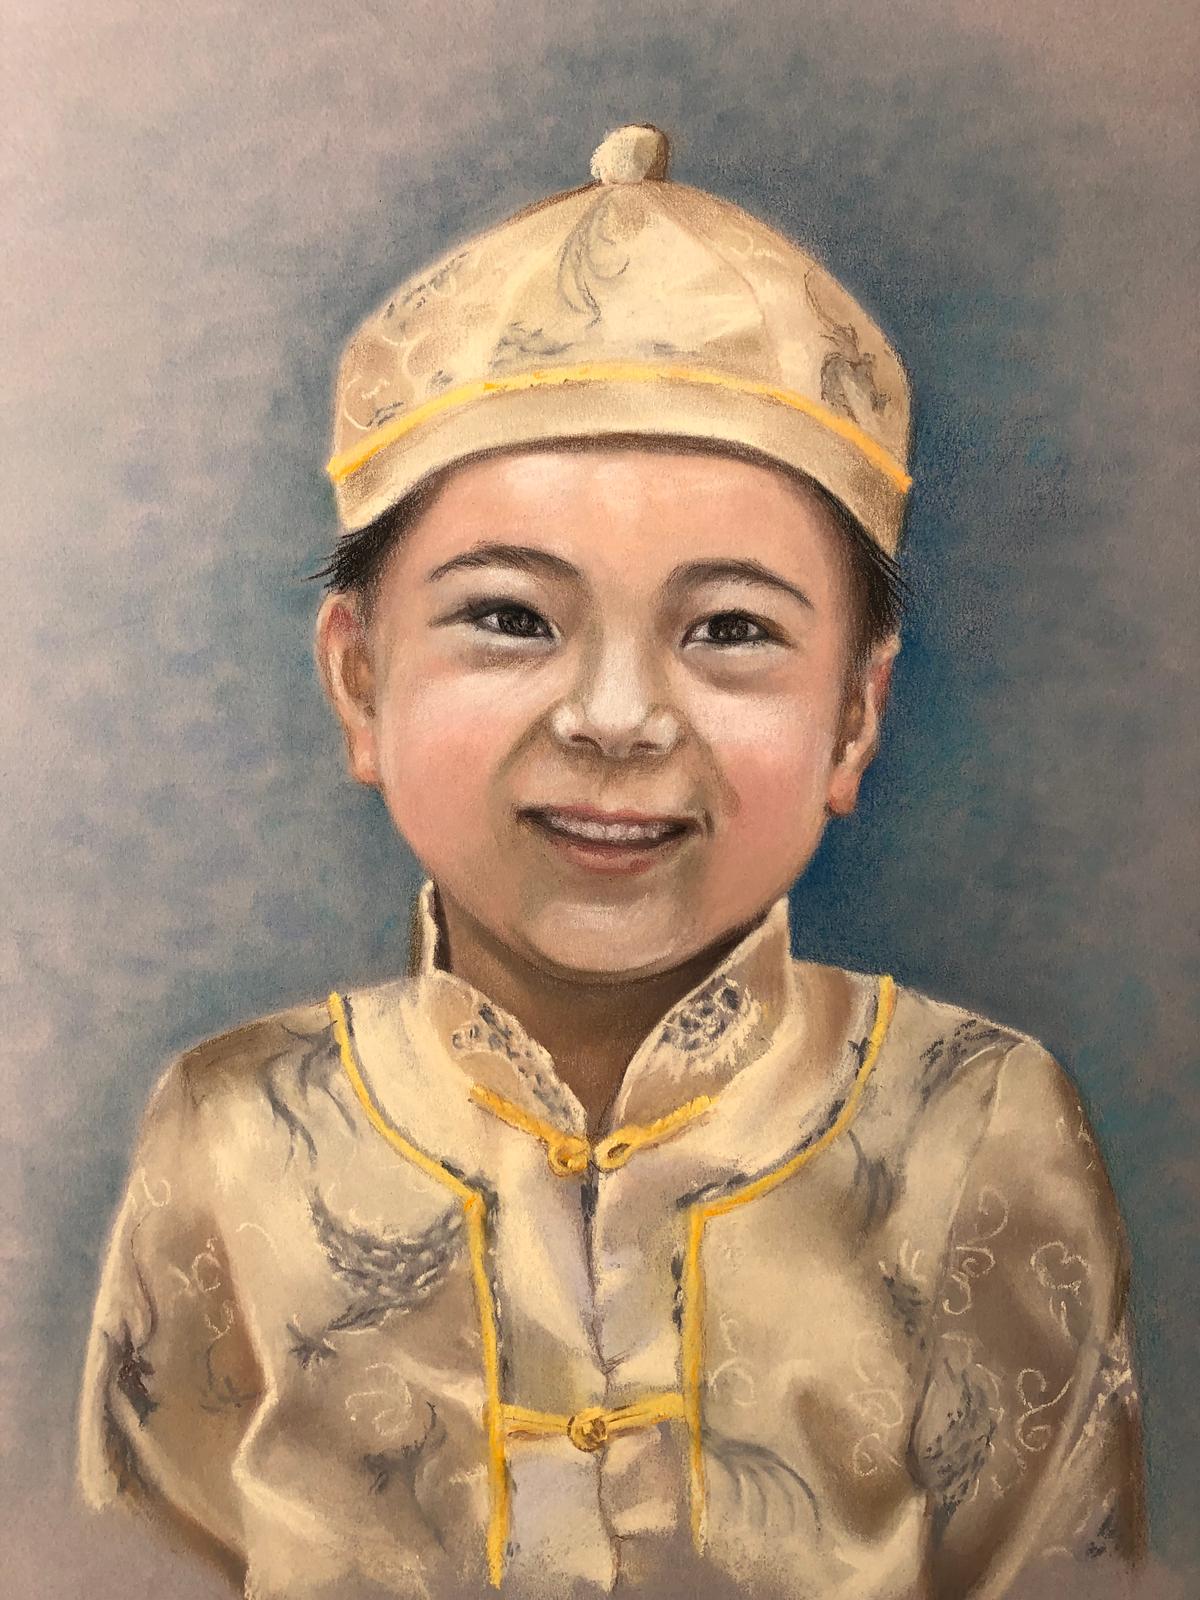 Chinese boy in traditional costume, by Barbara Schafer. Pastel. (Courtesy of Barbara Schafer)